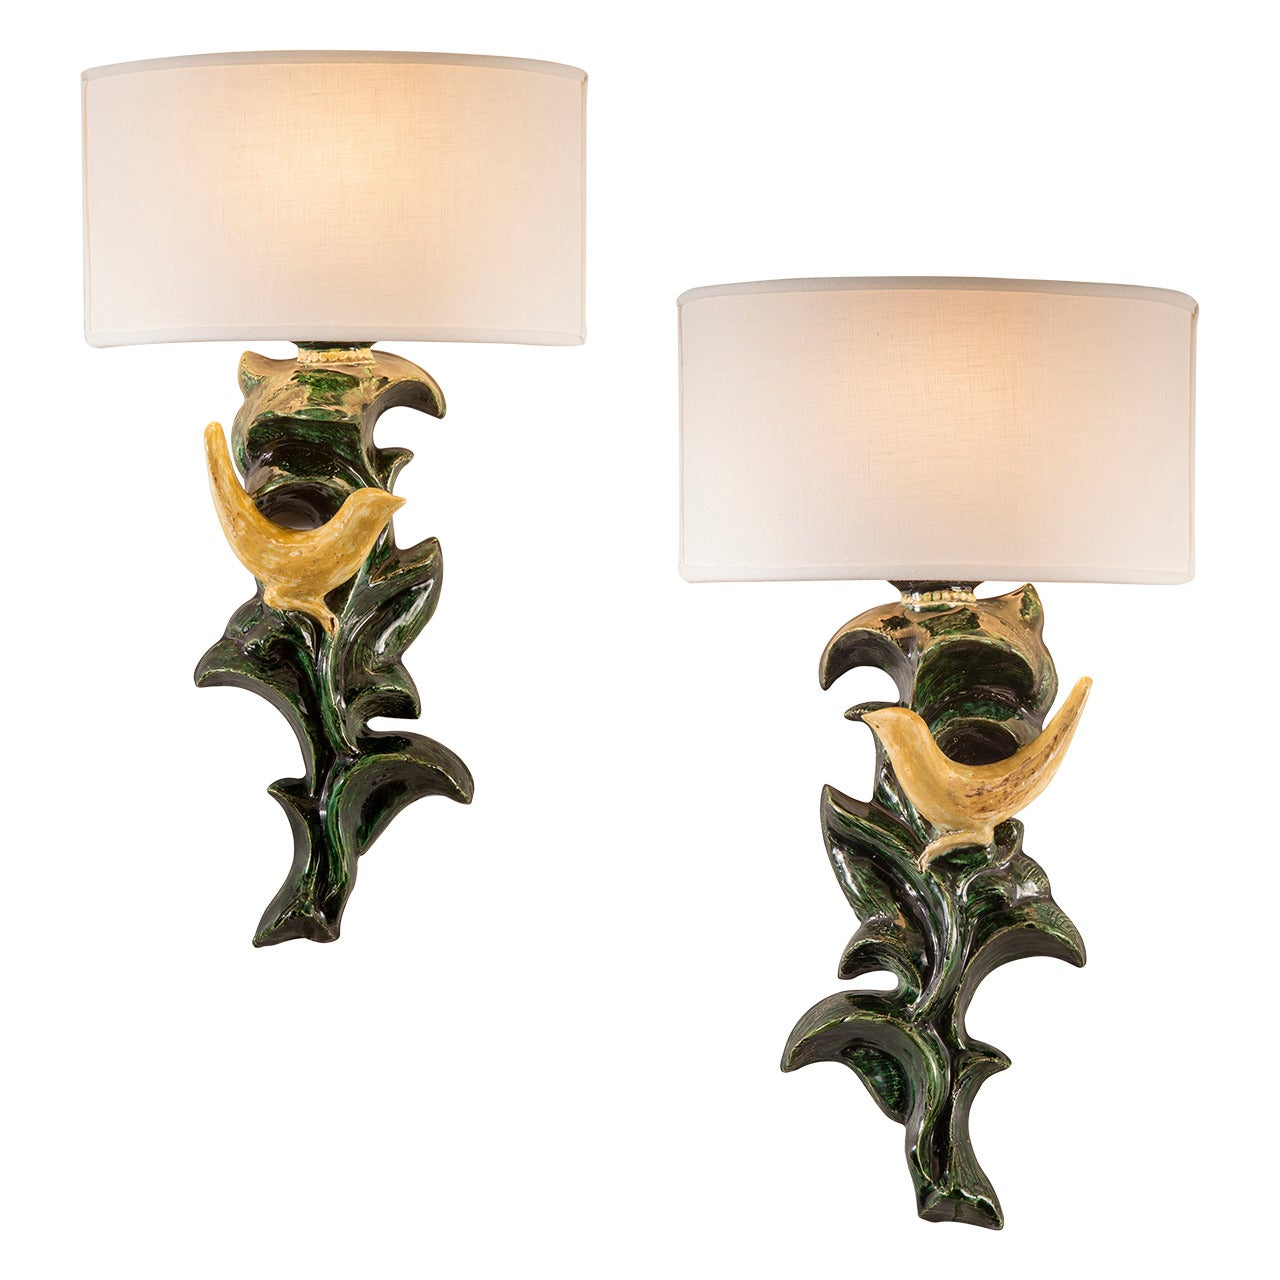 Paul Pouchol, a Pair of French Mirror-Image Faience Sconces